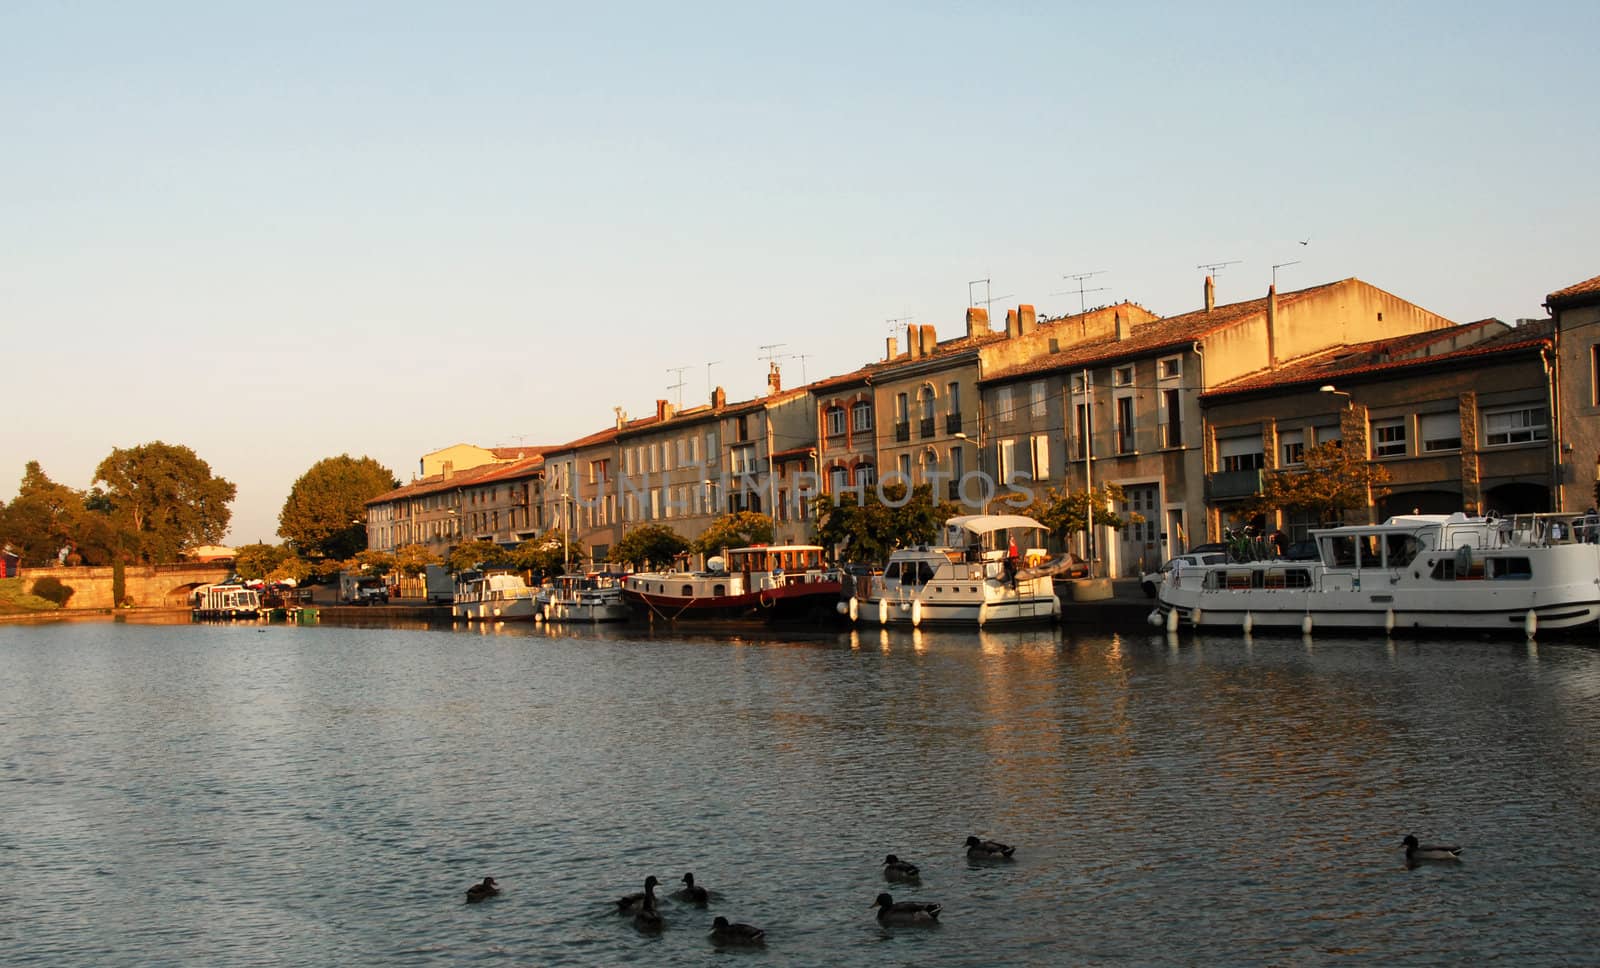 Castelnaudary, little city in Aude, France, mondial capital of the cassoulet